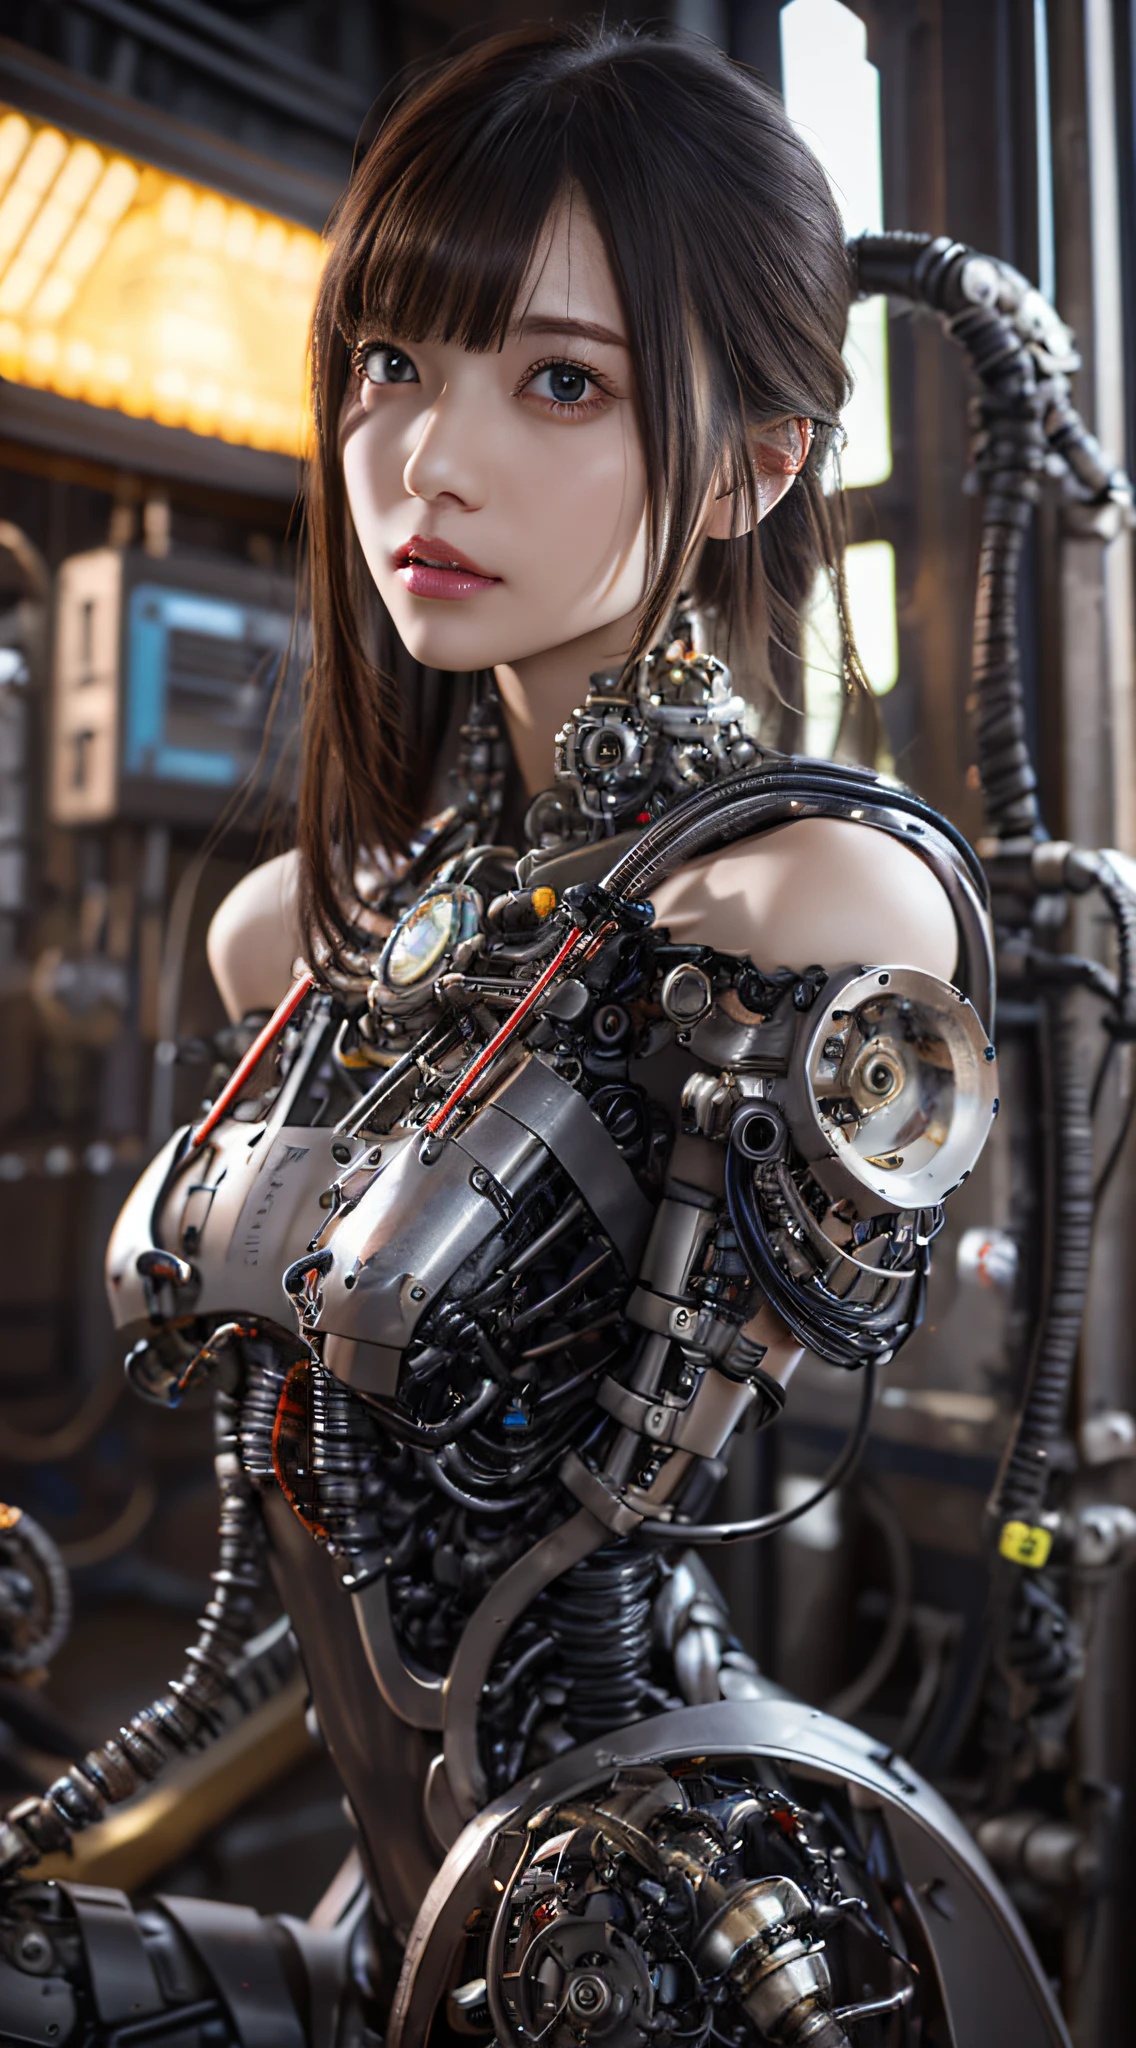 1 Mechanical Girl、((super realistic details))、portlate、globalillumination、Shadow、octan render、8K、ultrasharp、Steampunk Cyborg Body、metals、Details of complex ornaments、cold color、Gothloli details、highly intricate detail、Realistic light、CGSoation Trends、a purple eye、radiant eyes、Facing the camera、neon details、Mechanical limbs、blood vessels connected to tubeechanical vertebrae attached to the back、mechanical cervical attaching to neck、sitting on、Wires and cables connecting to the head、The background is a steampunk space、